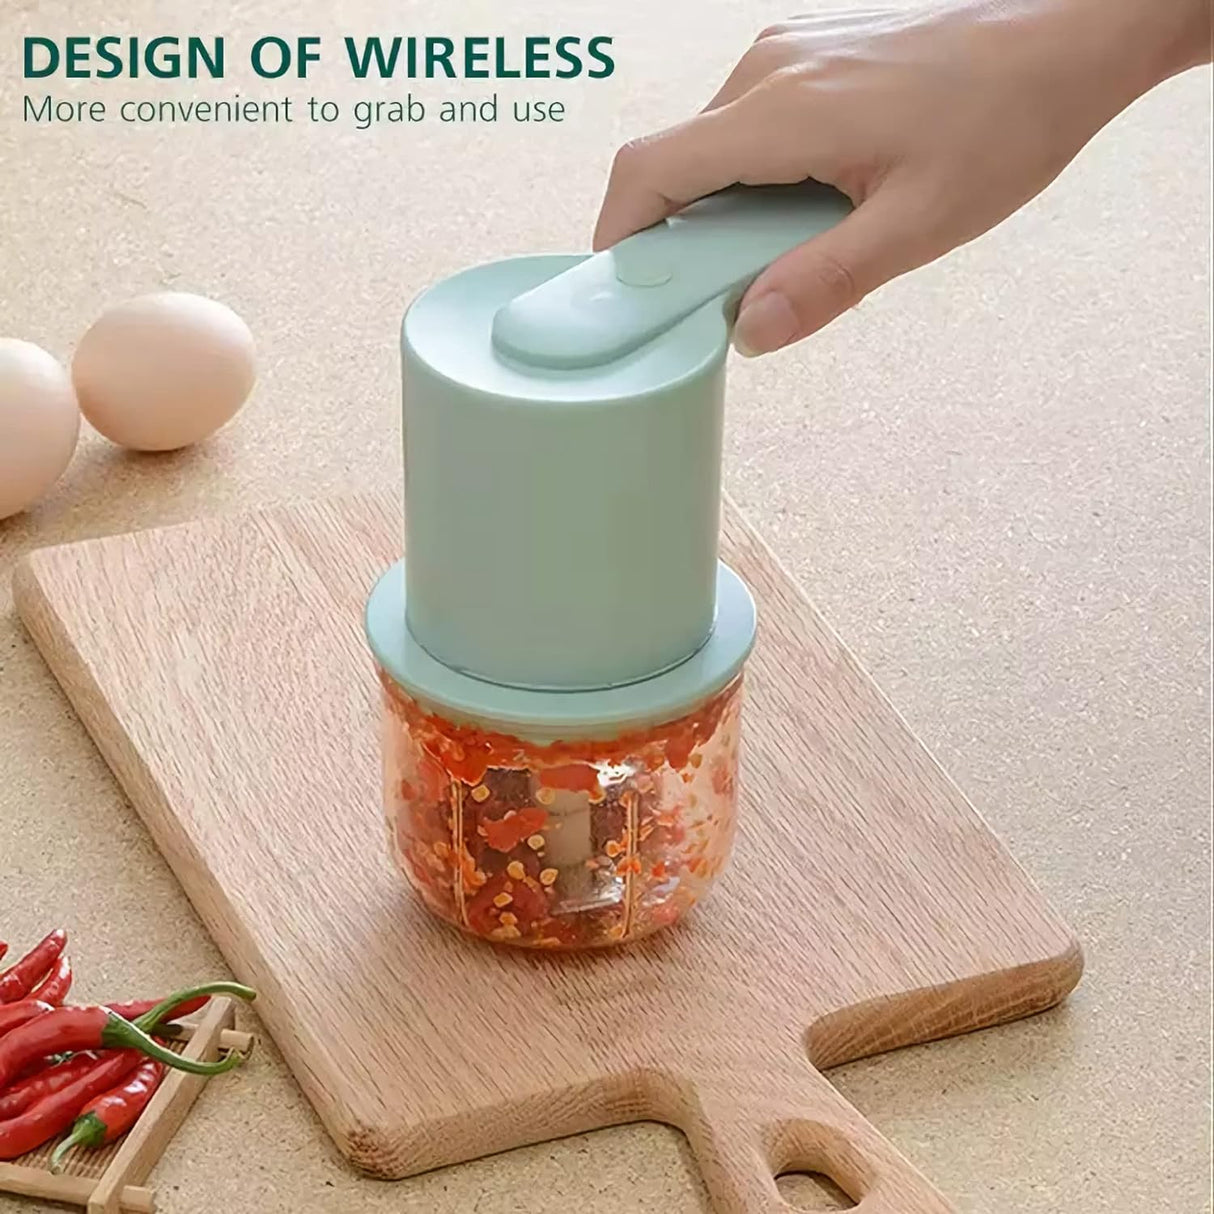 INTEXCA 2 in 1 Electric Wireless Food Processor Mixer, Garlic Chopper Masher Egg Whisk Beater White